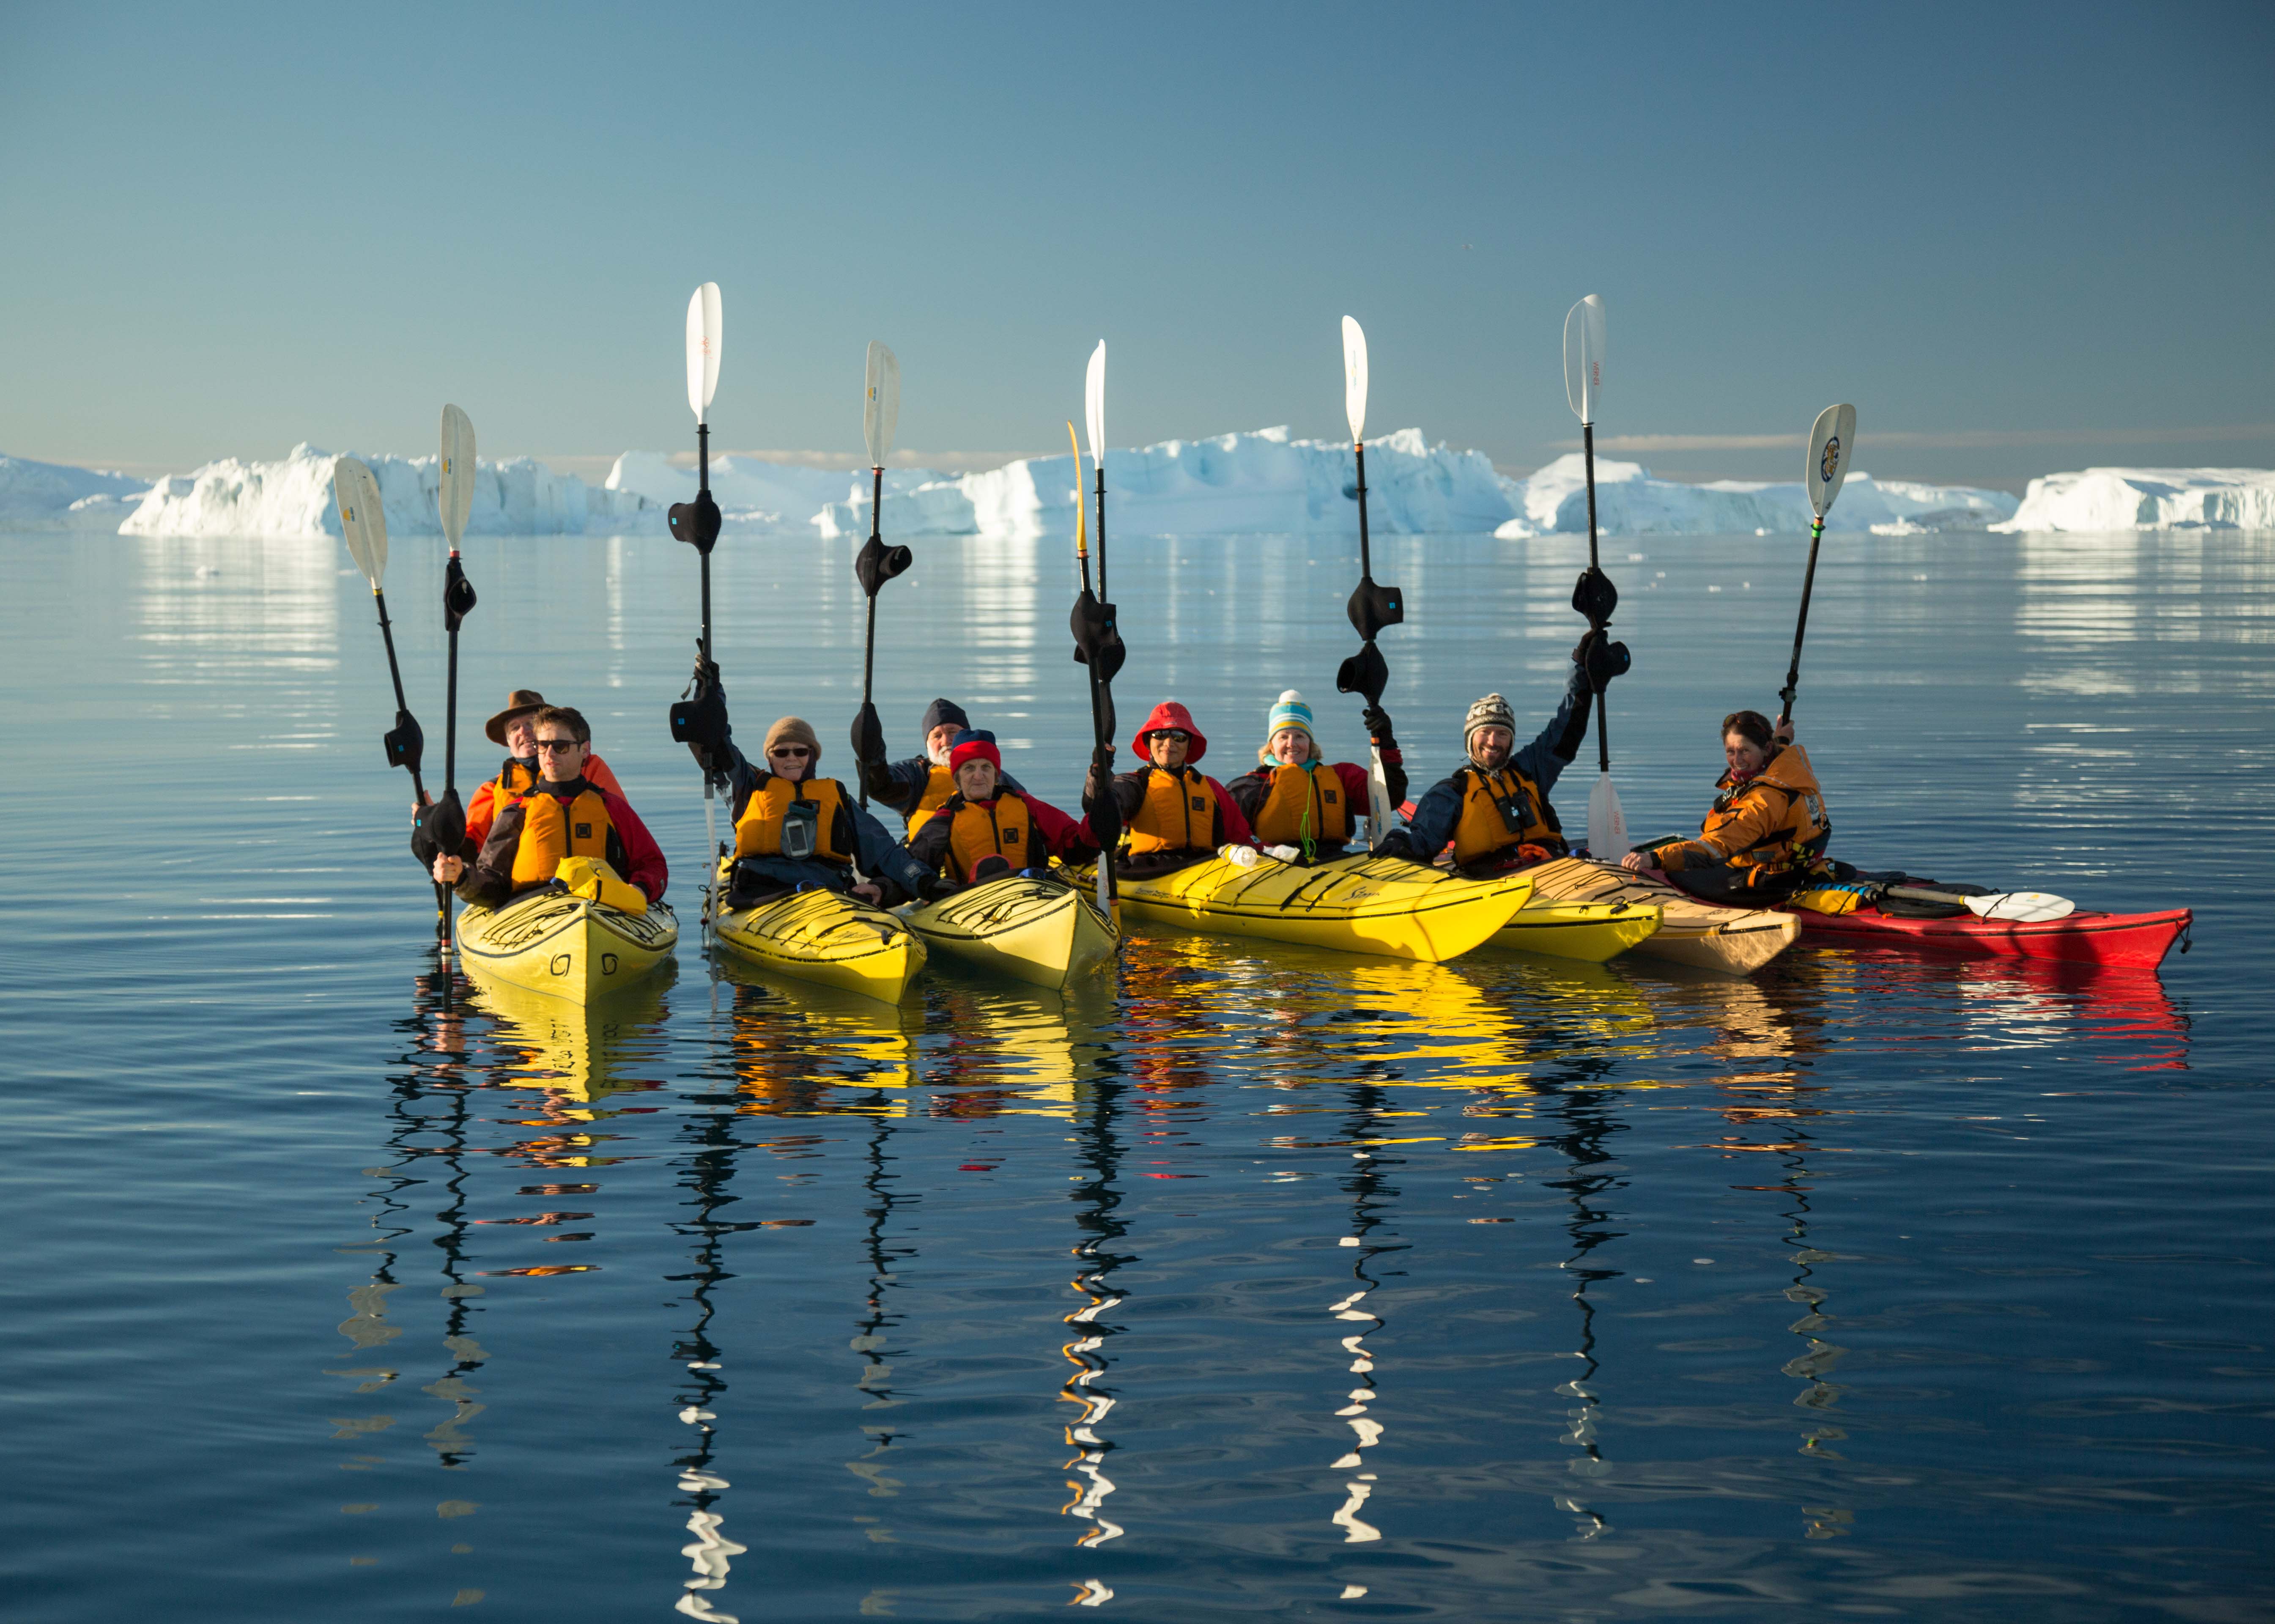 Quark Expeditions guests kayak in Ilulissat Icefjord in West Greenland.